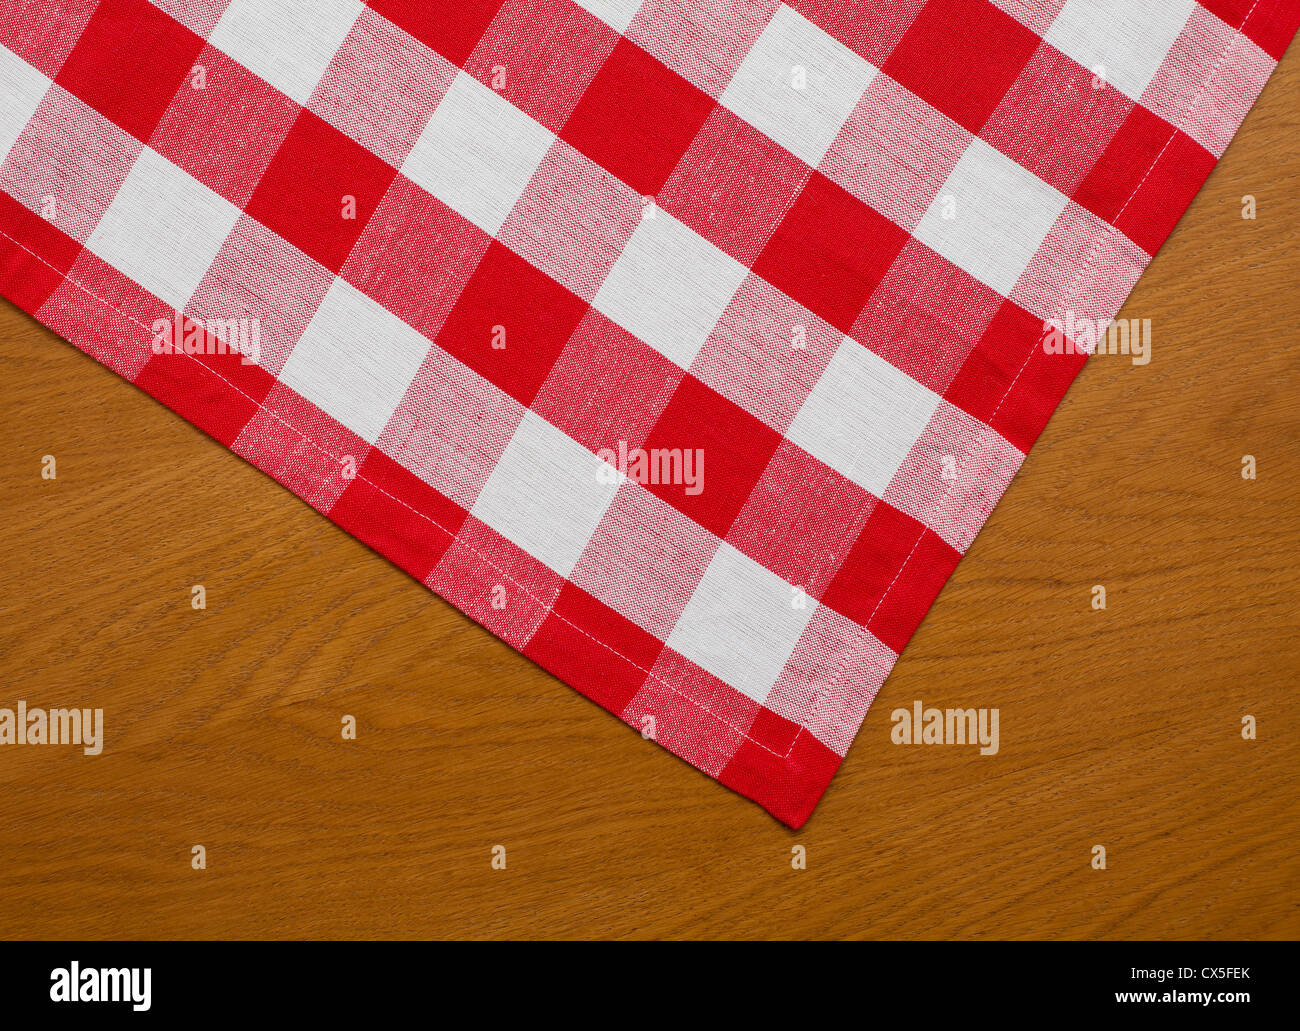 wooden kitchen table with red gingham tablecloth Stock Photo